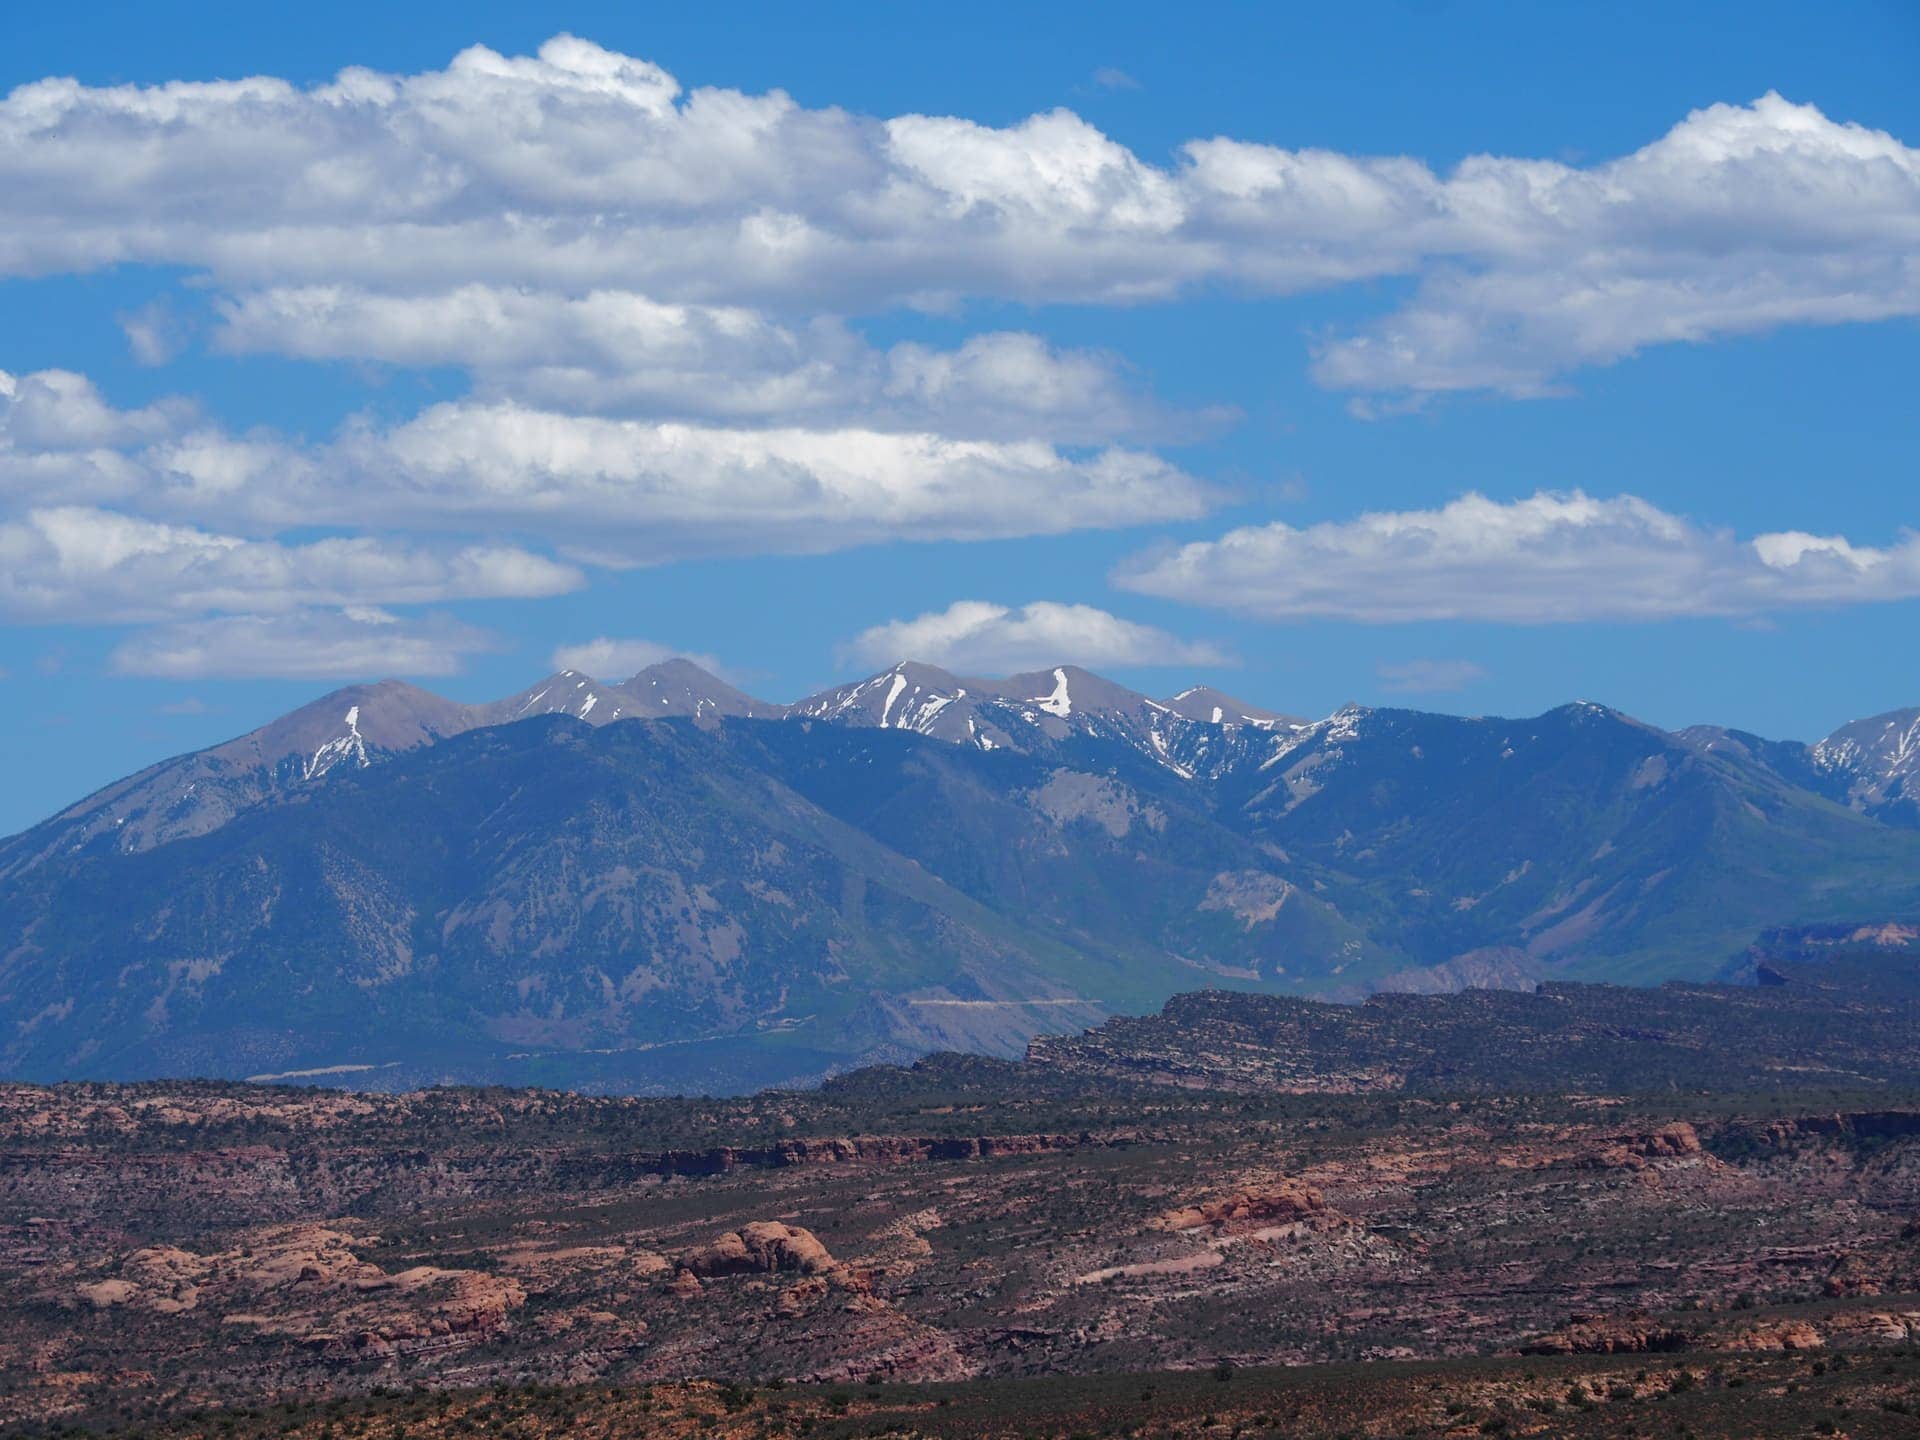 The La Sal Mountains as seen from Arches National Park